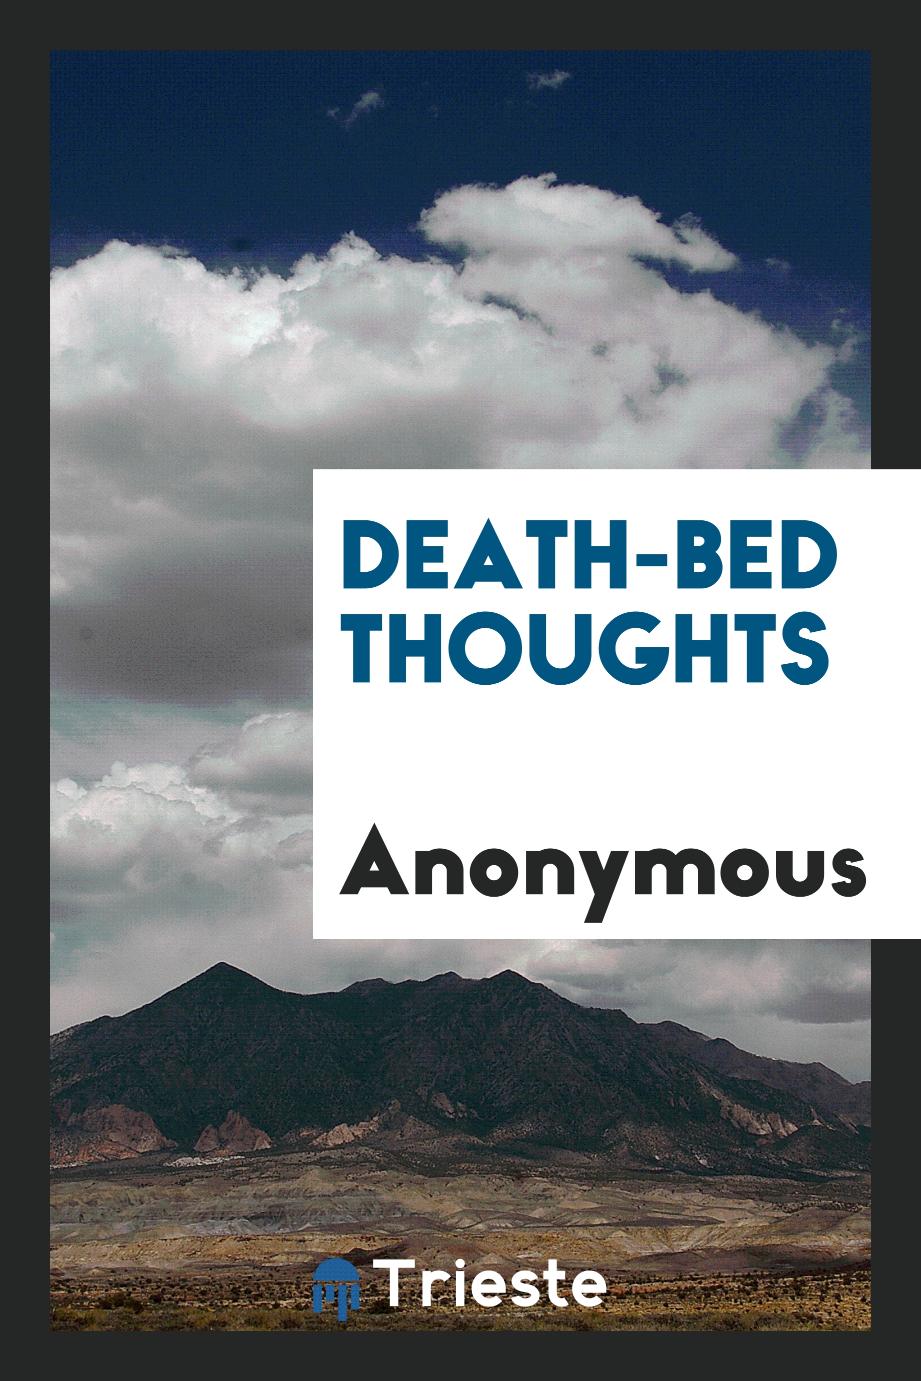 Death-Bed Thoughts